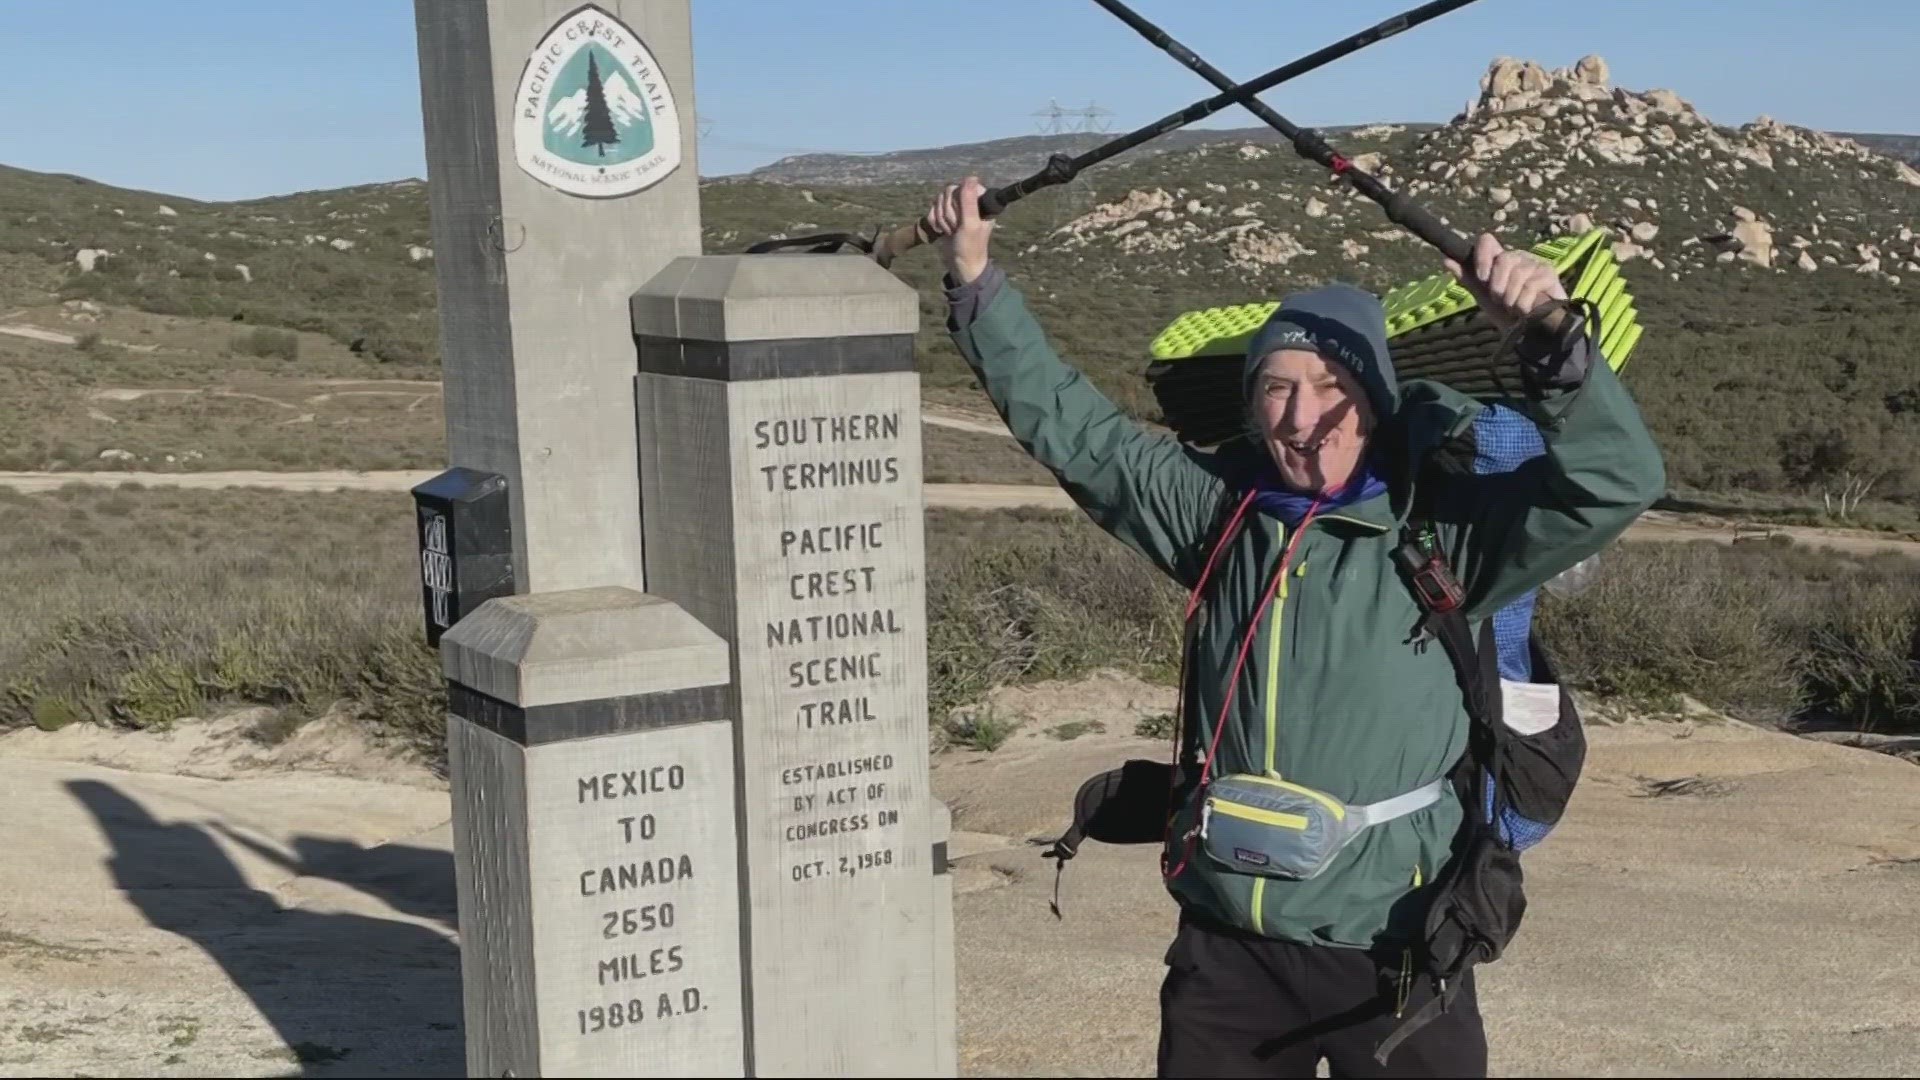 Bob started his trek along the 2,600-mile trail last week. He hopes to make it all the way to the US-Canada border.